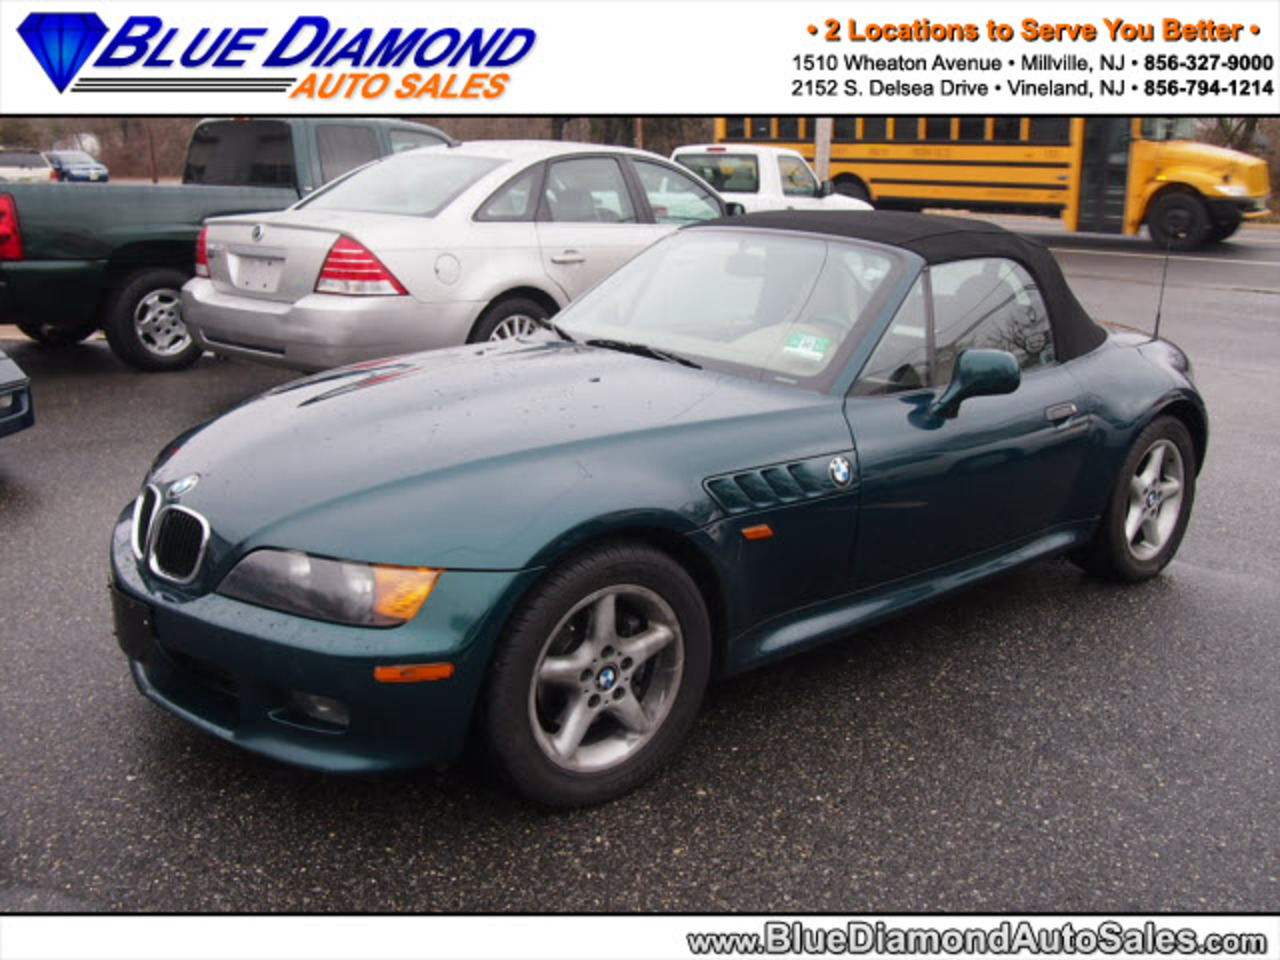 New Jersey BMW Z3 Vehicles For Sale - DealerRater